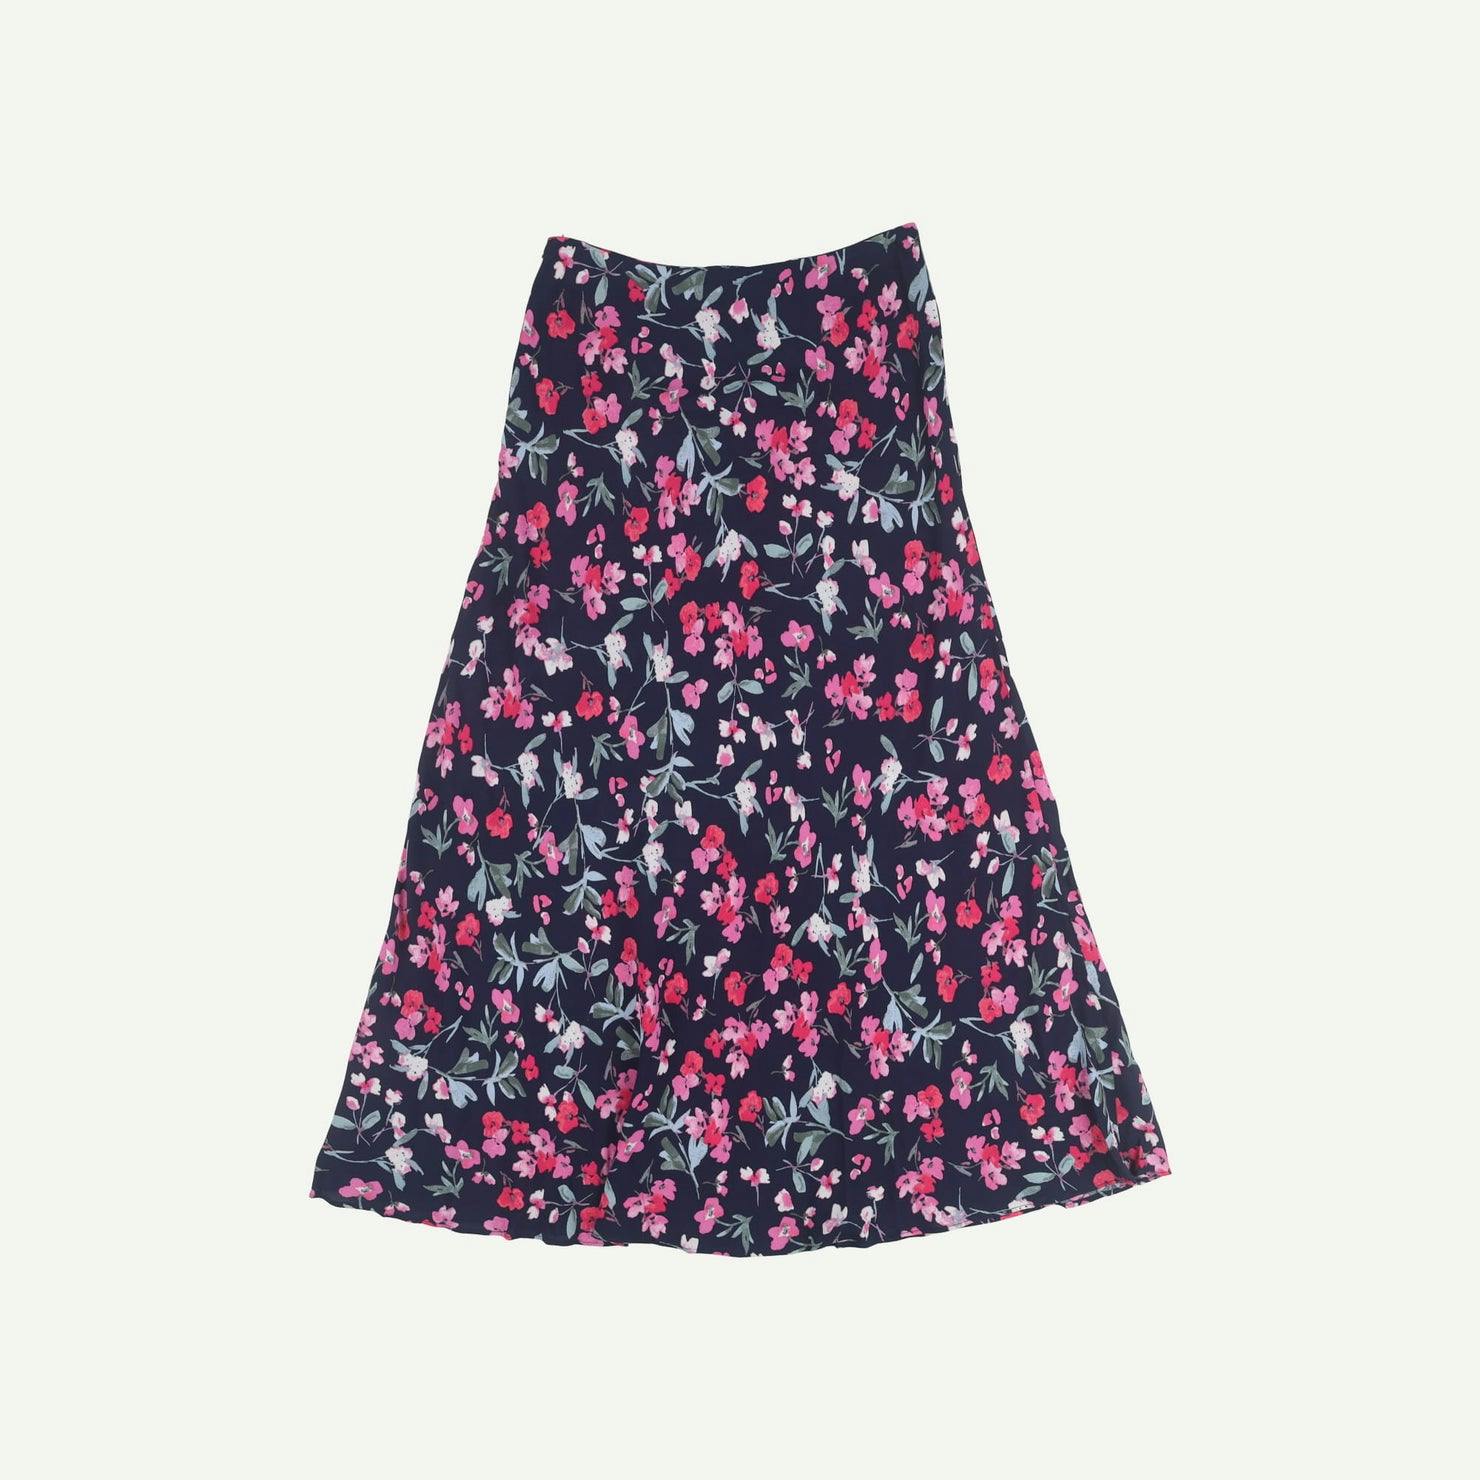 Joules As new Navy Skirt